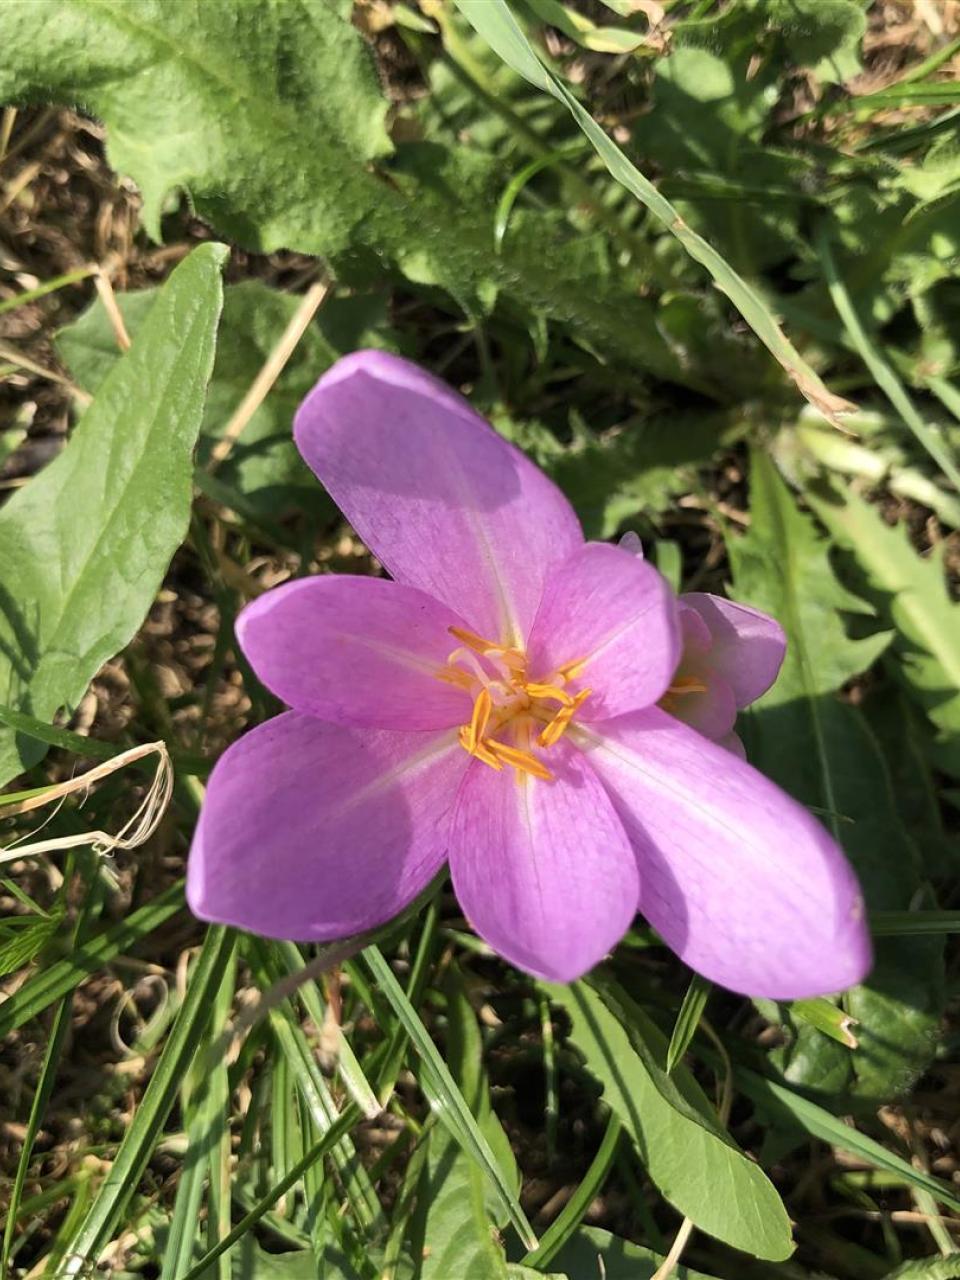 The saffron flower is violet. It blossoms in the month of September in the fields of Upper Valais.